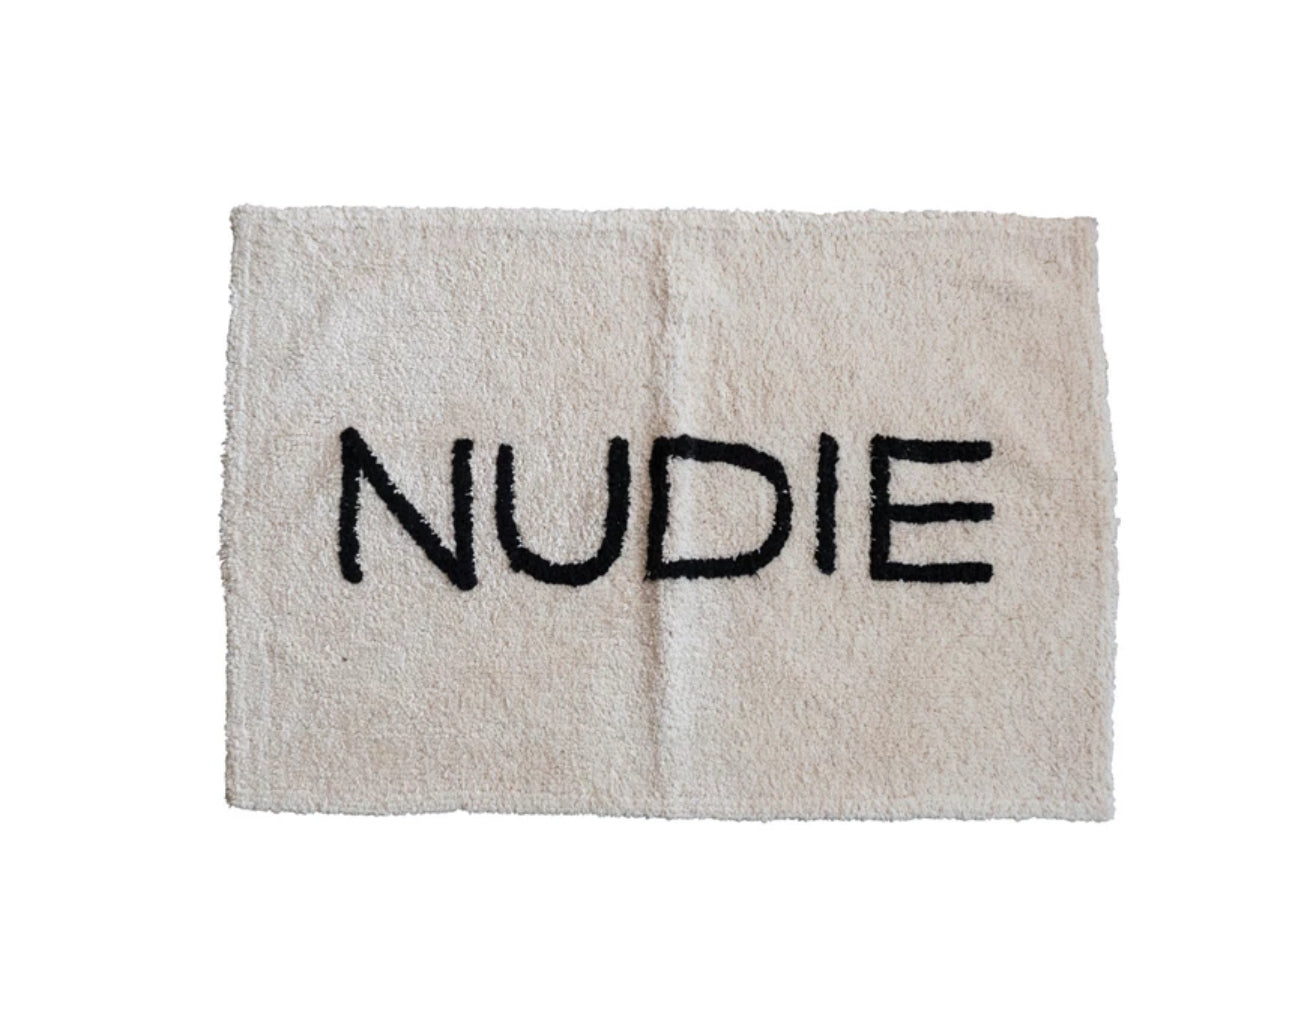 Cotton Tufted Bath Mat "Nudie" - White with Black Letters